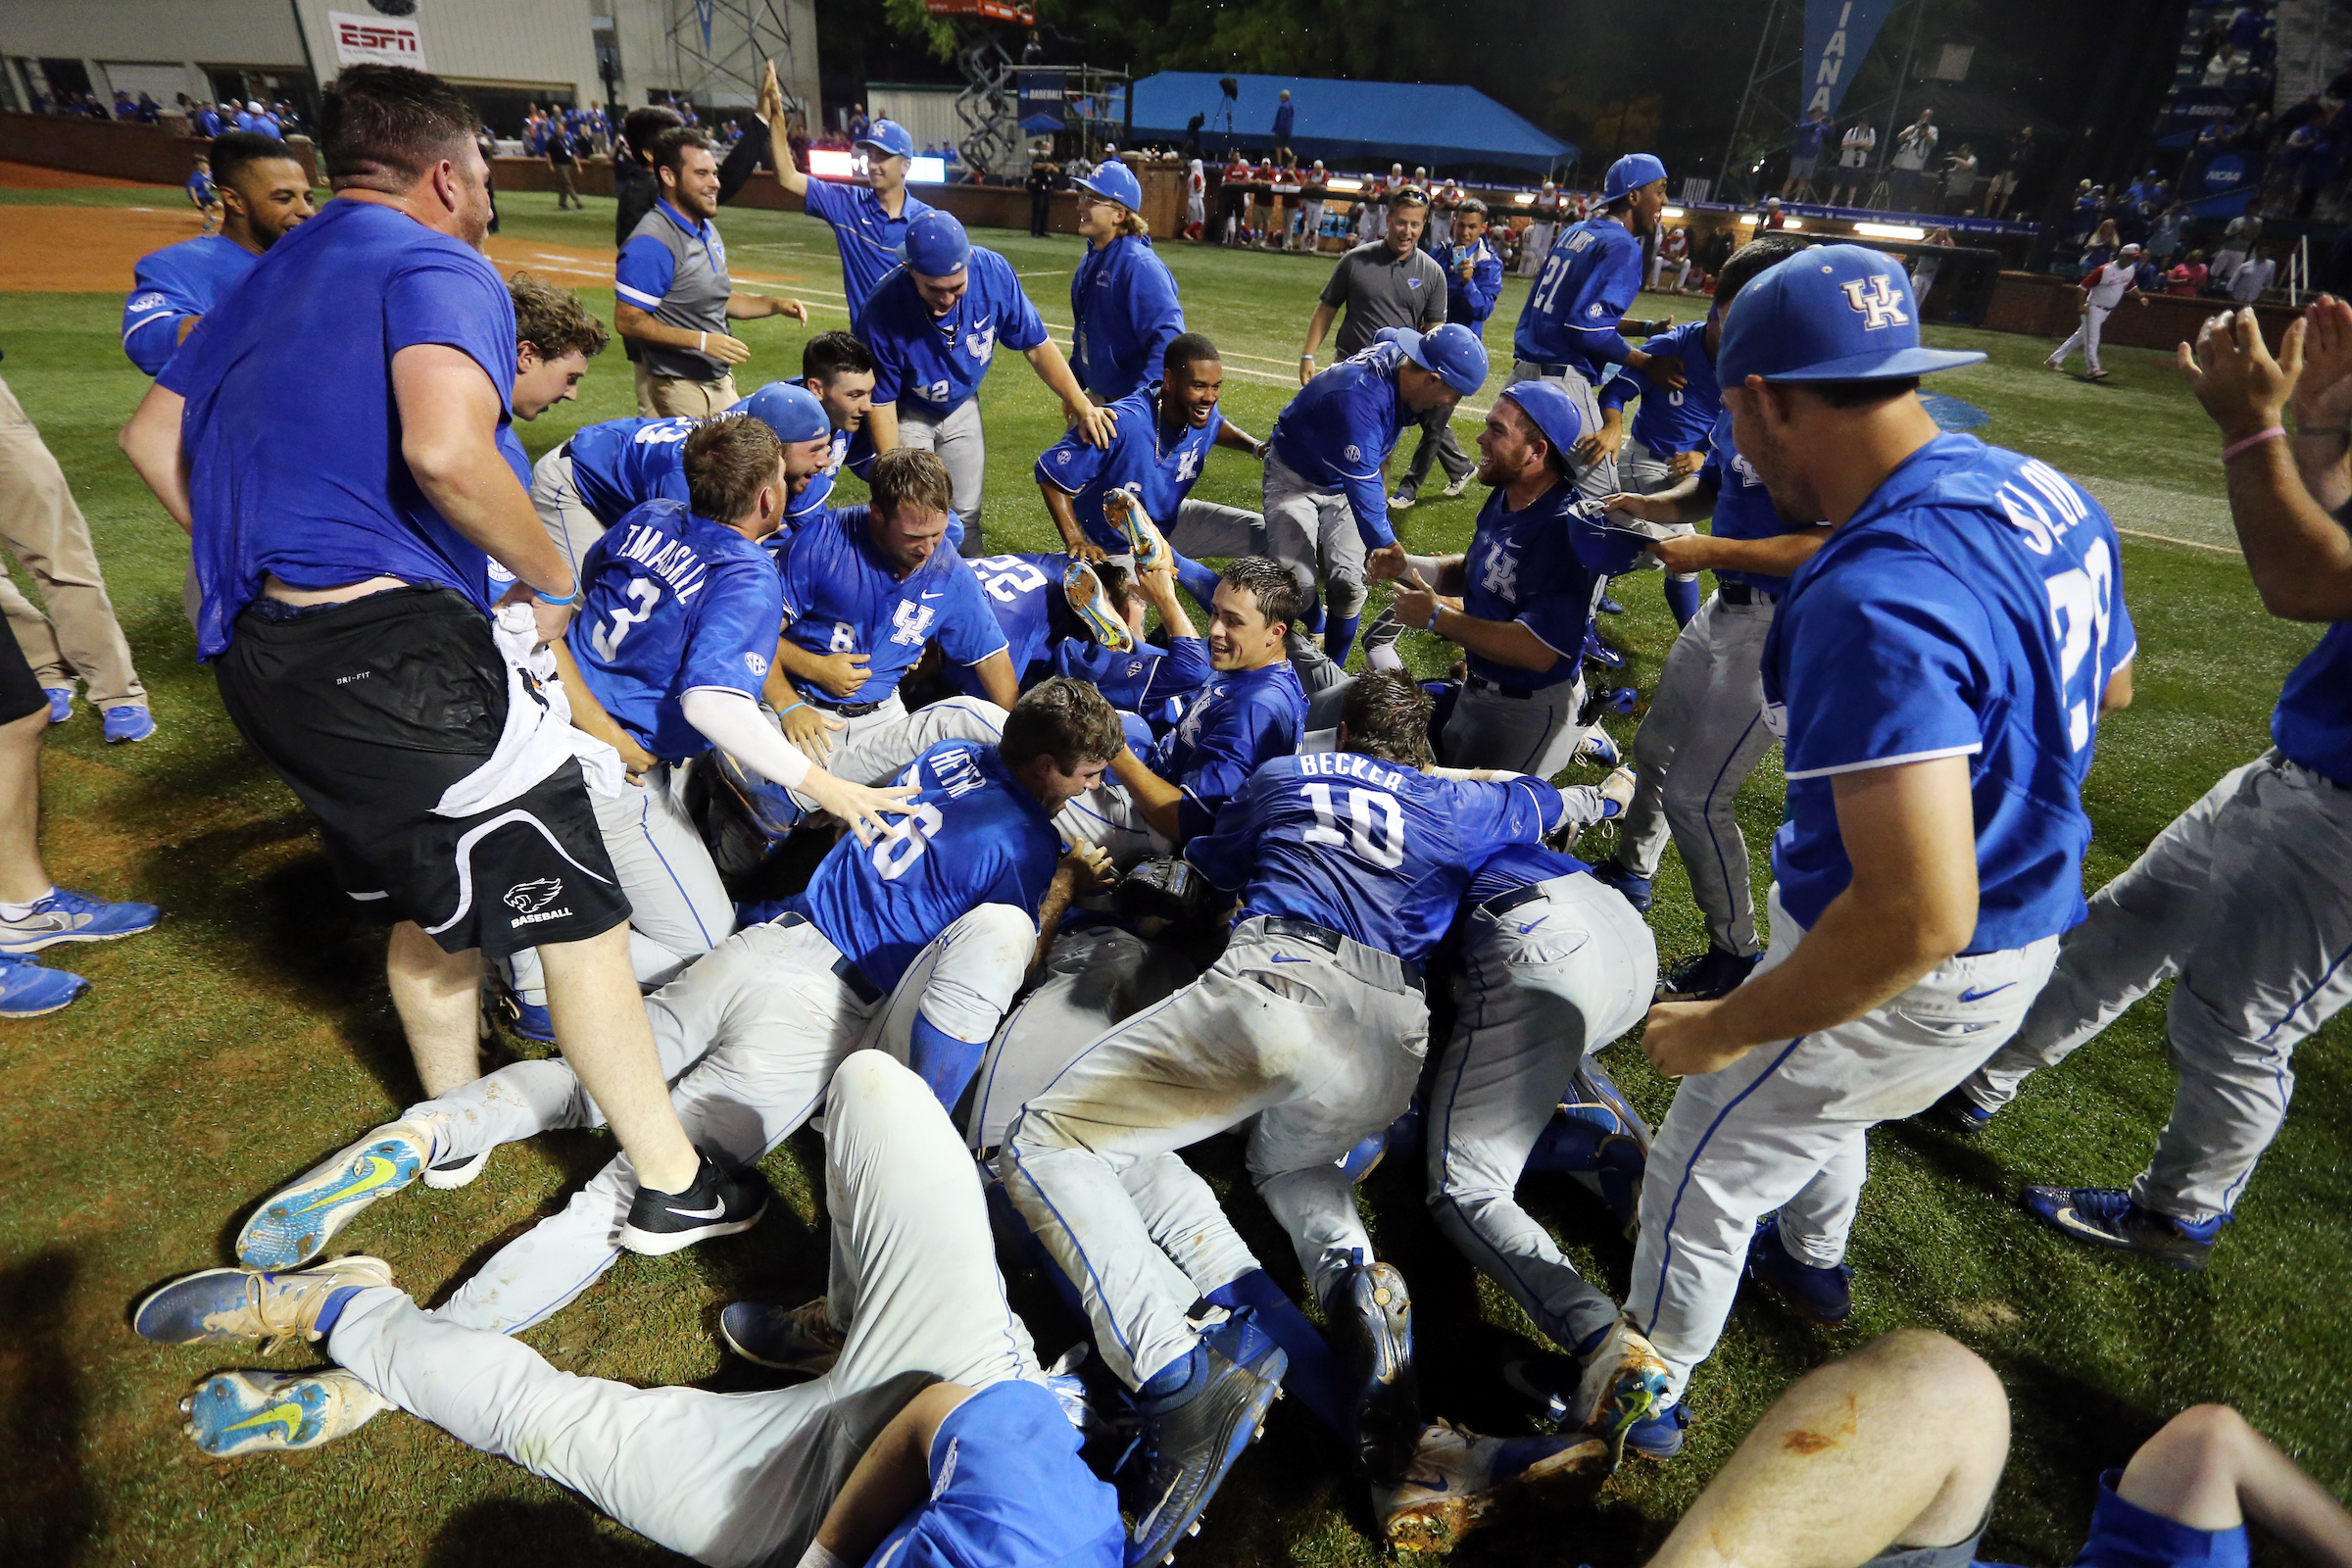 Kentucky Advances to Super Regional For First Time